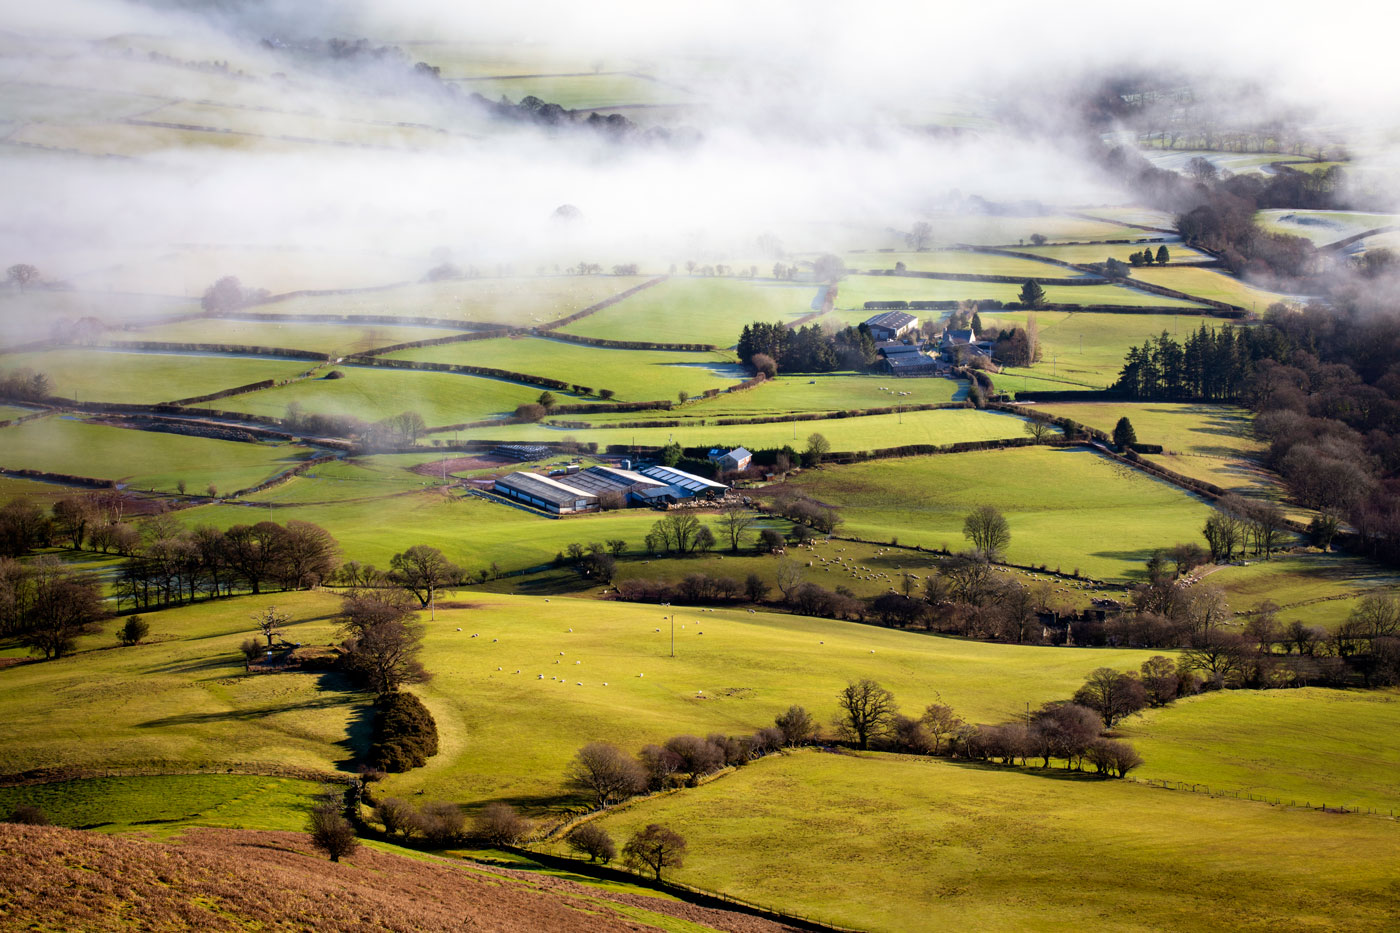 Welsh Agriculture Act: What are the key provisions?